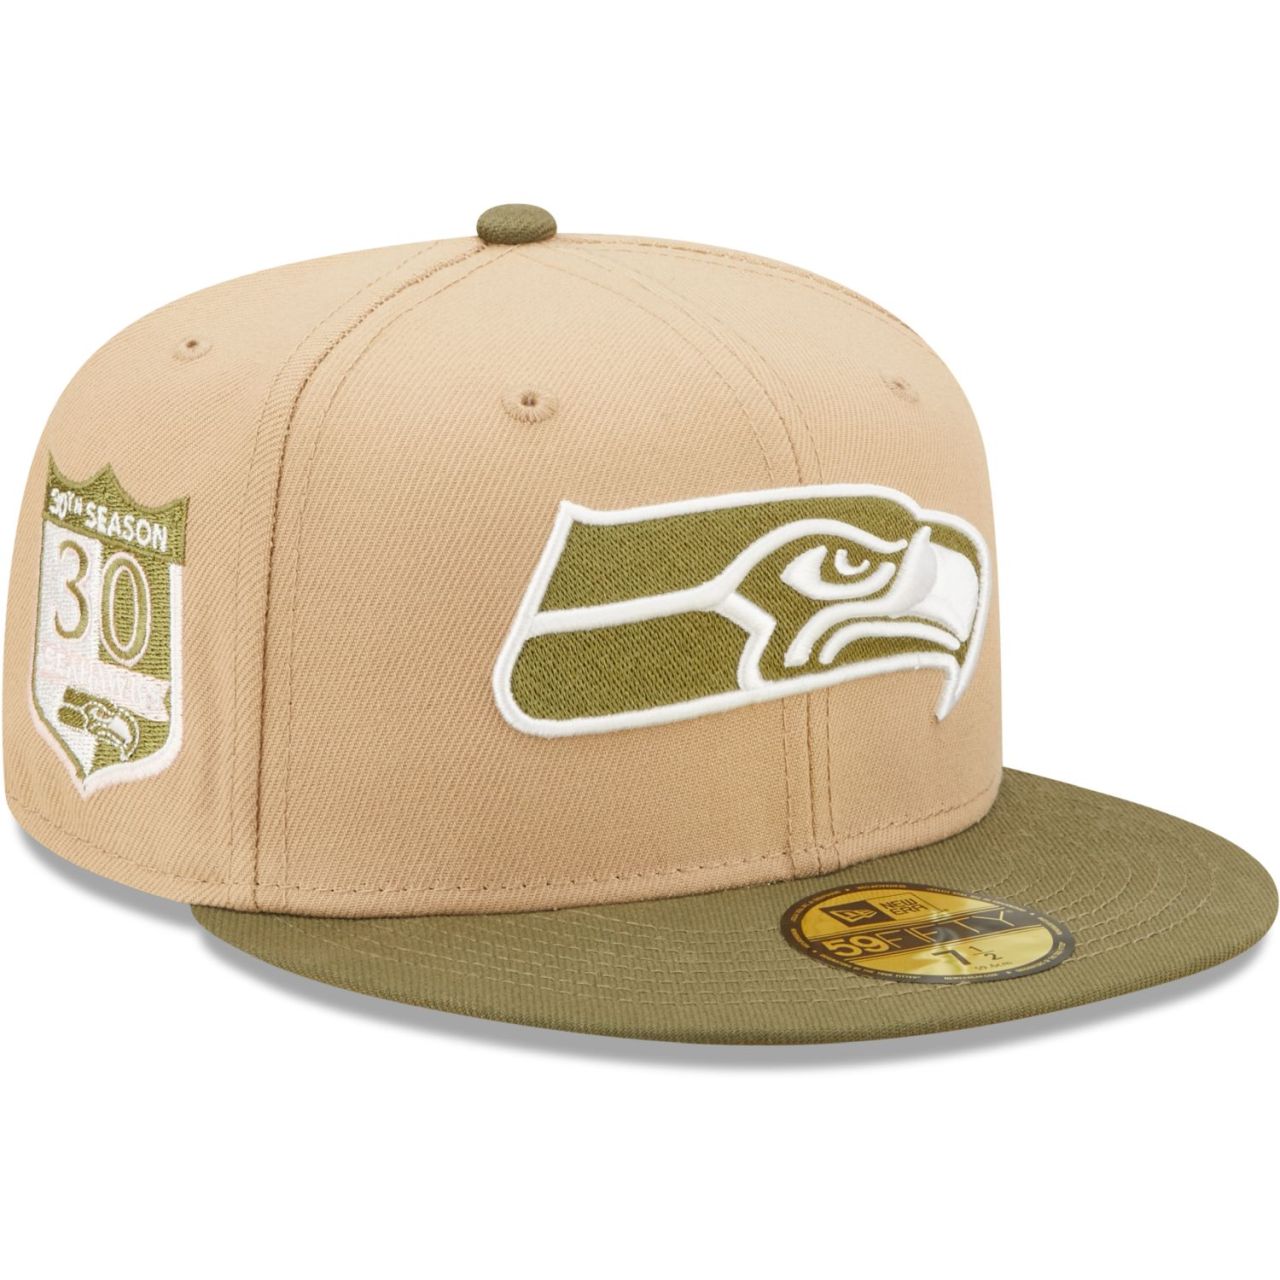 New Era 59Fifty Fitted Cap SIDEPATCH Seattle Seahawks camel von New Era